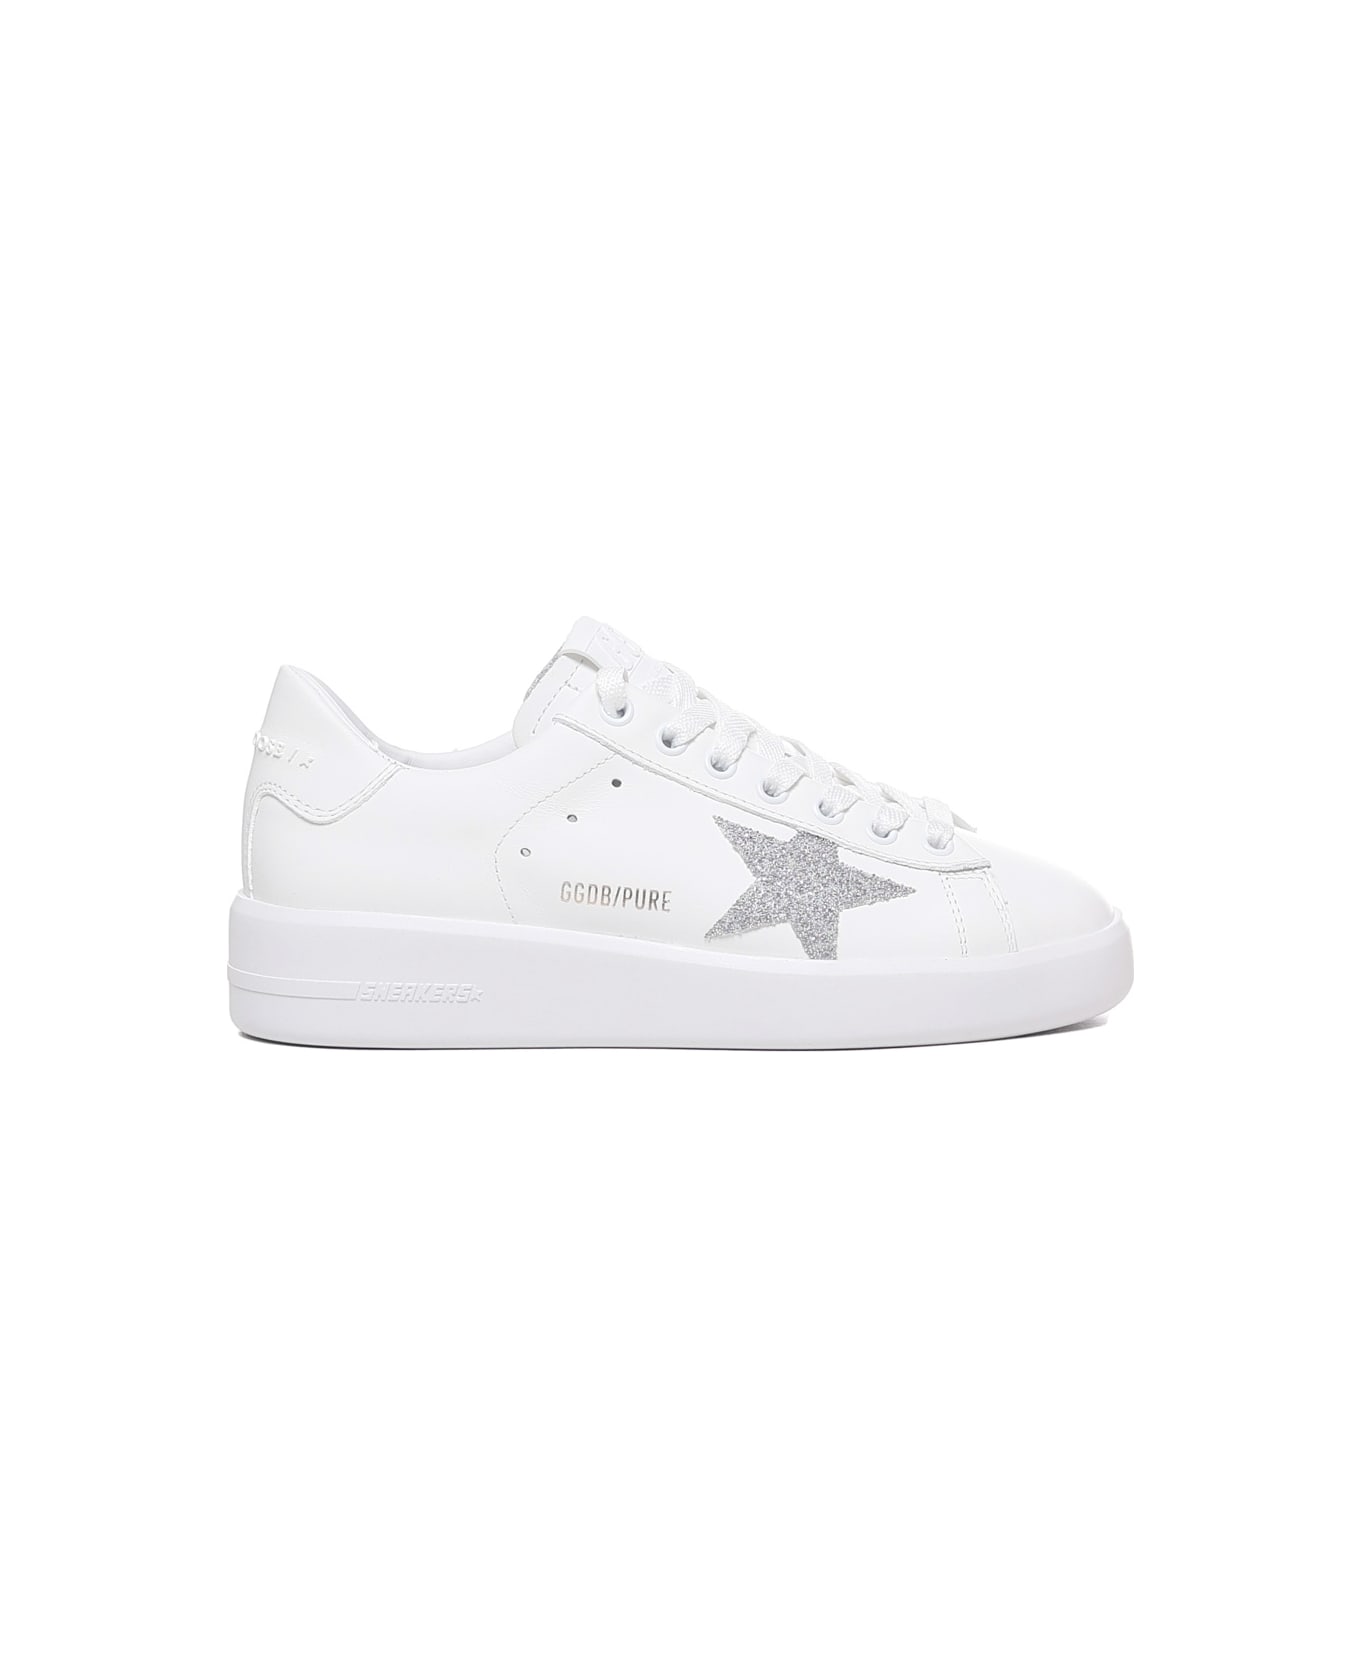 Golden Goose Pure New Sneakers In Leather With Contrasting Heel Tab - White スニーカー